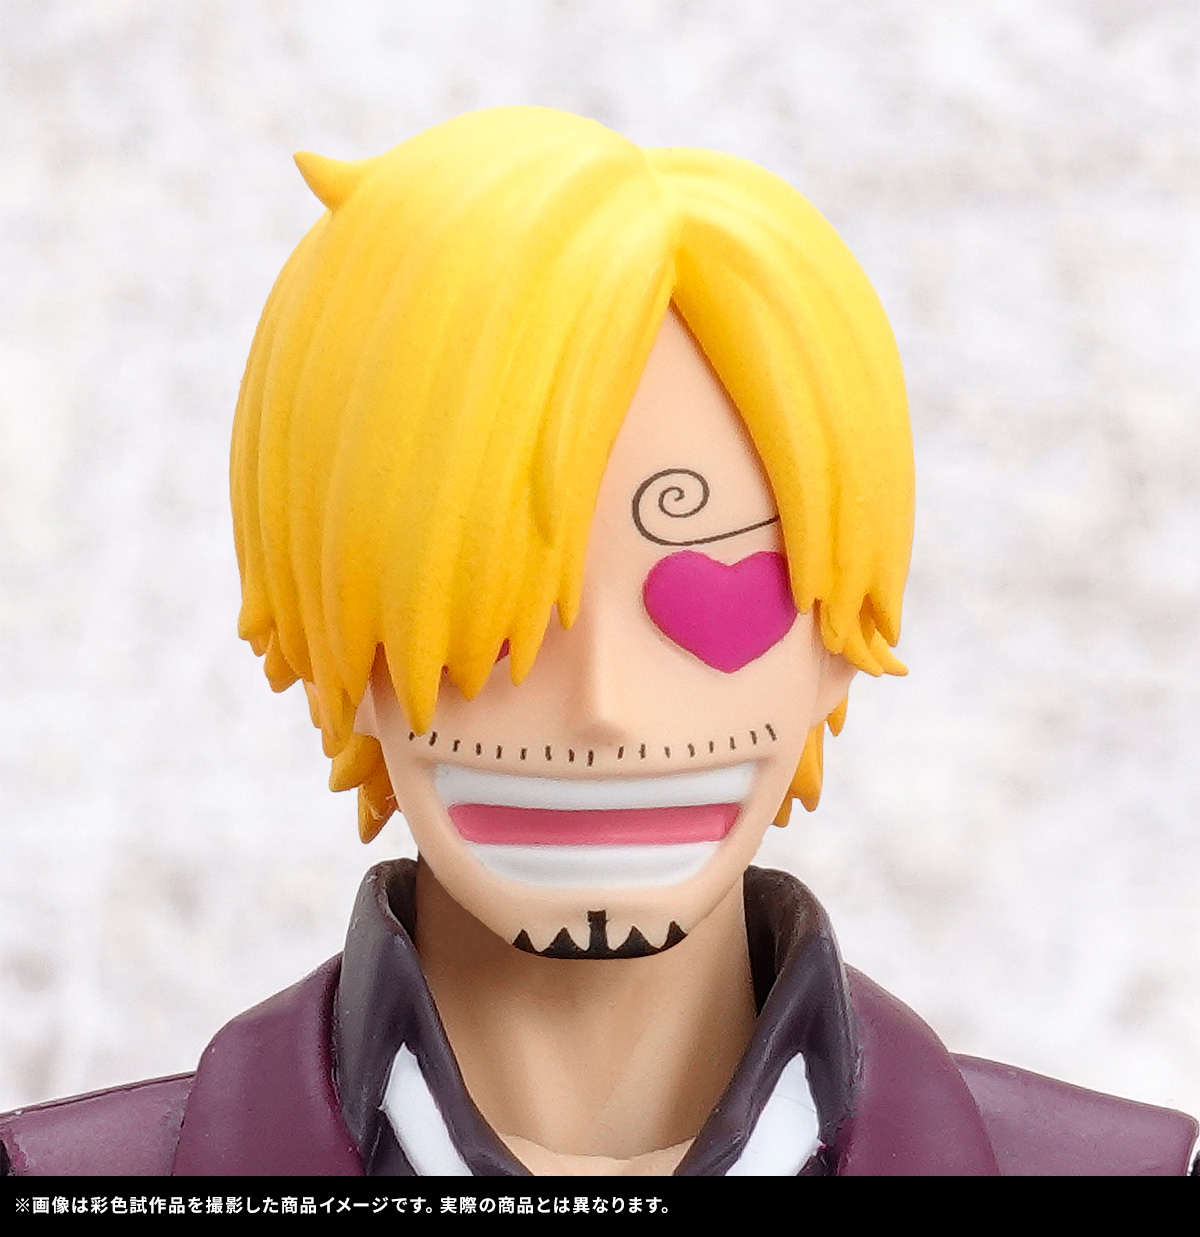 A new &quot;One Piece&quot; series comes to S.H.Figuarts! Introducing LUFFY, ZORO, and SANJI with new photos!